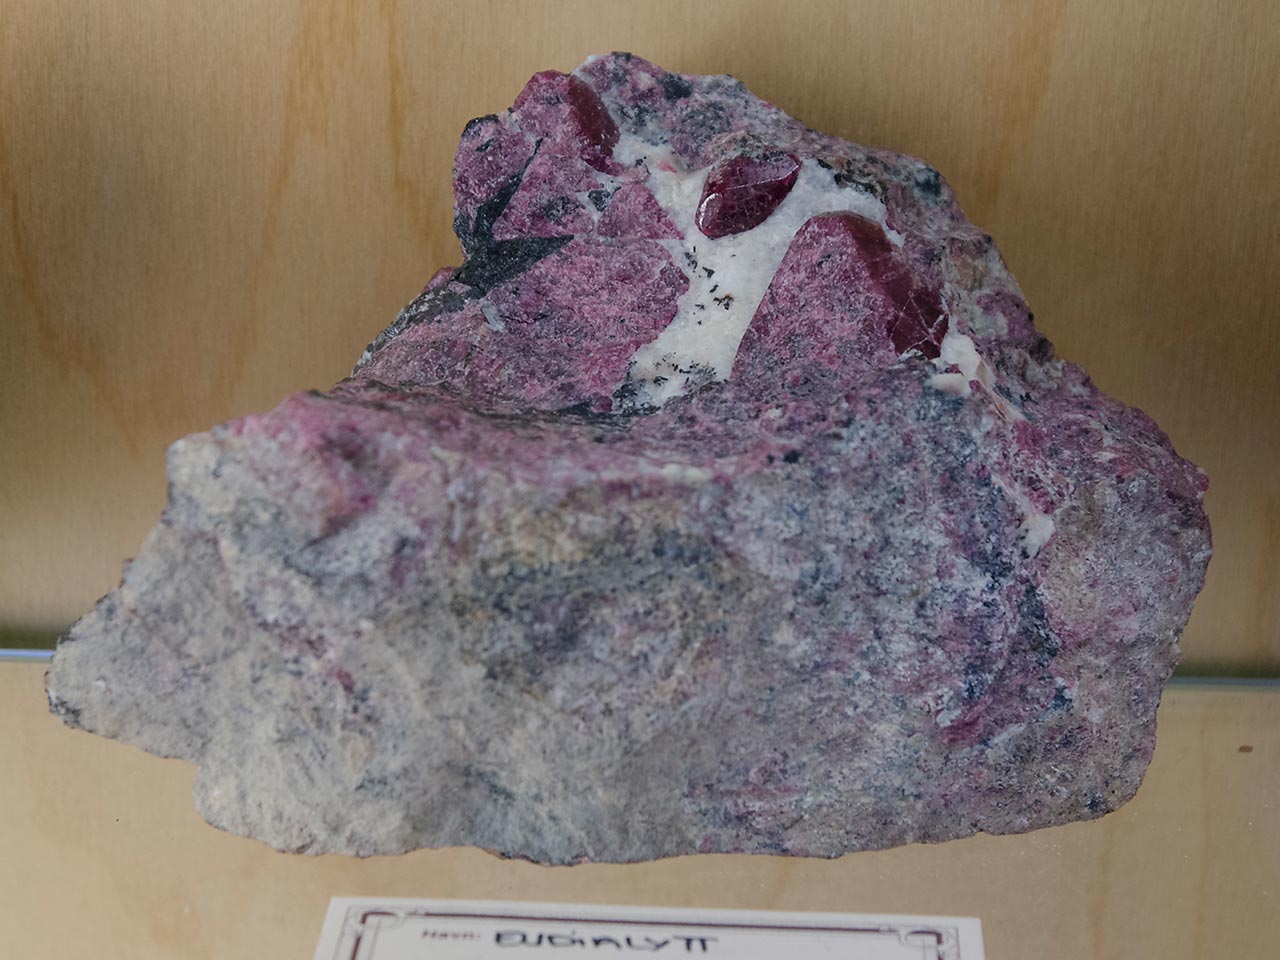 Rare eudialyte crystals from Norway